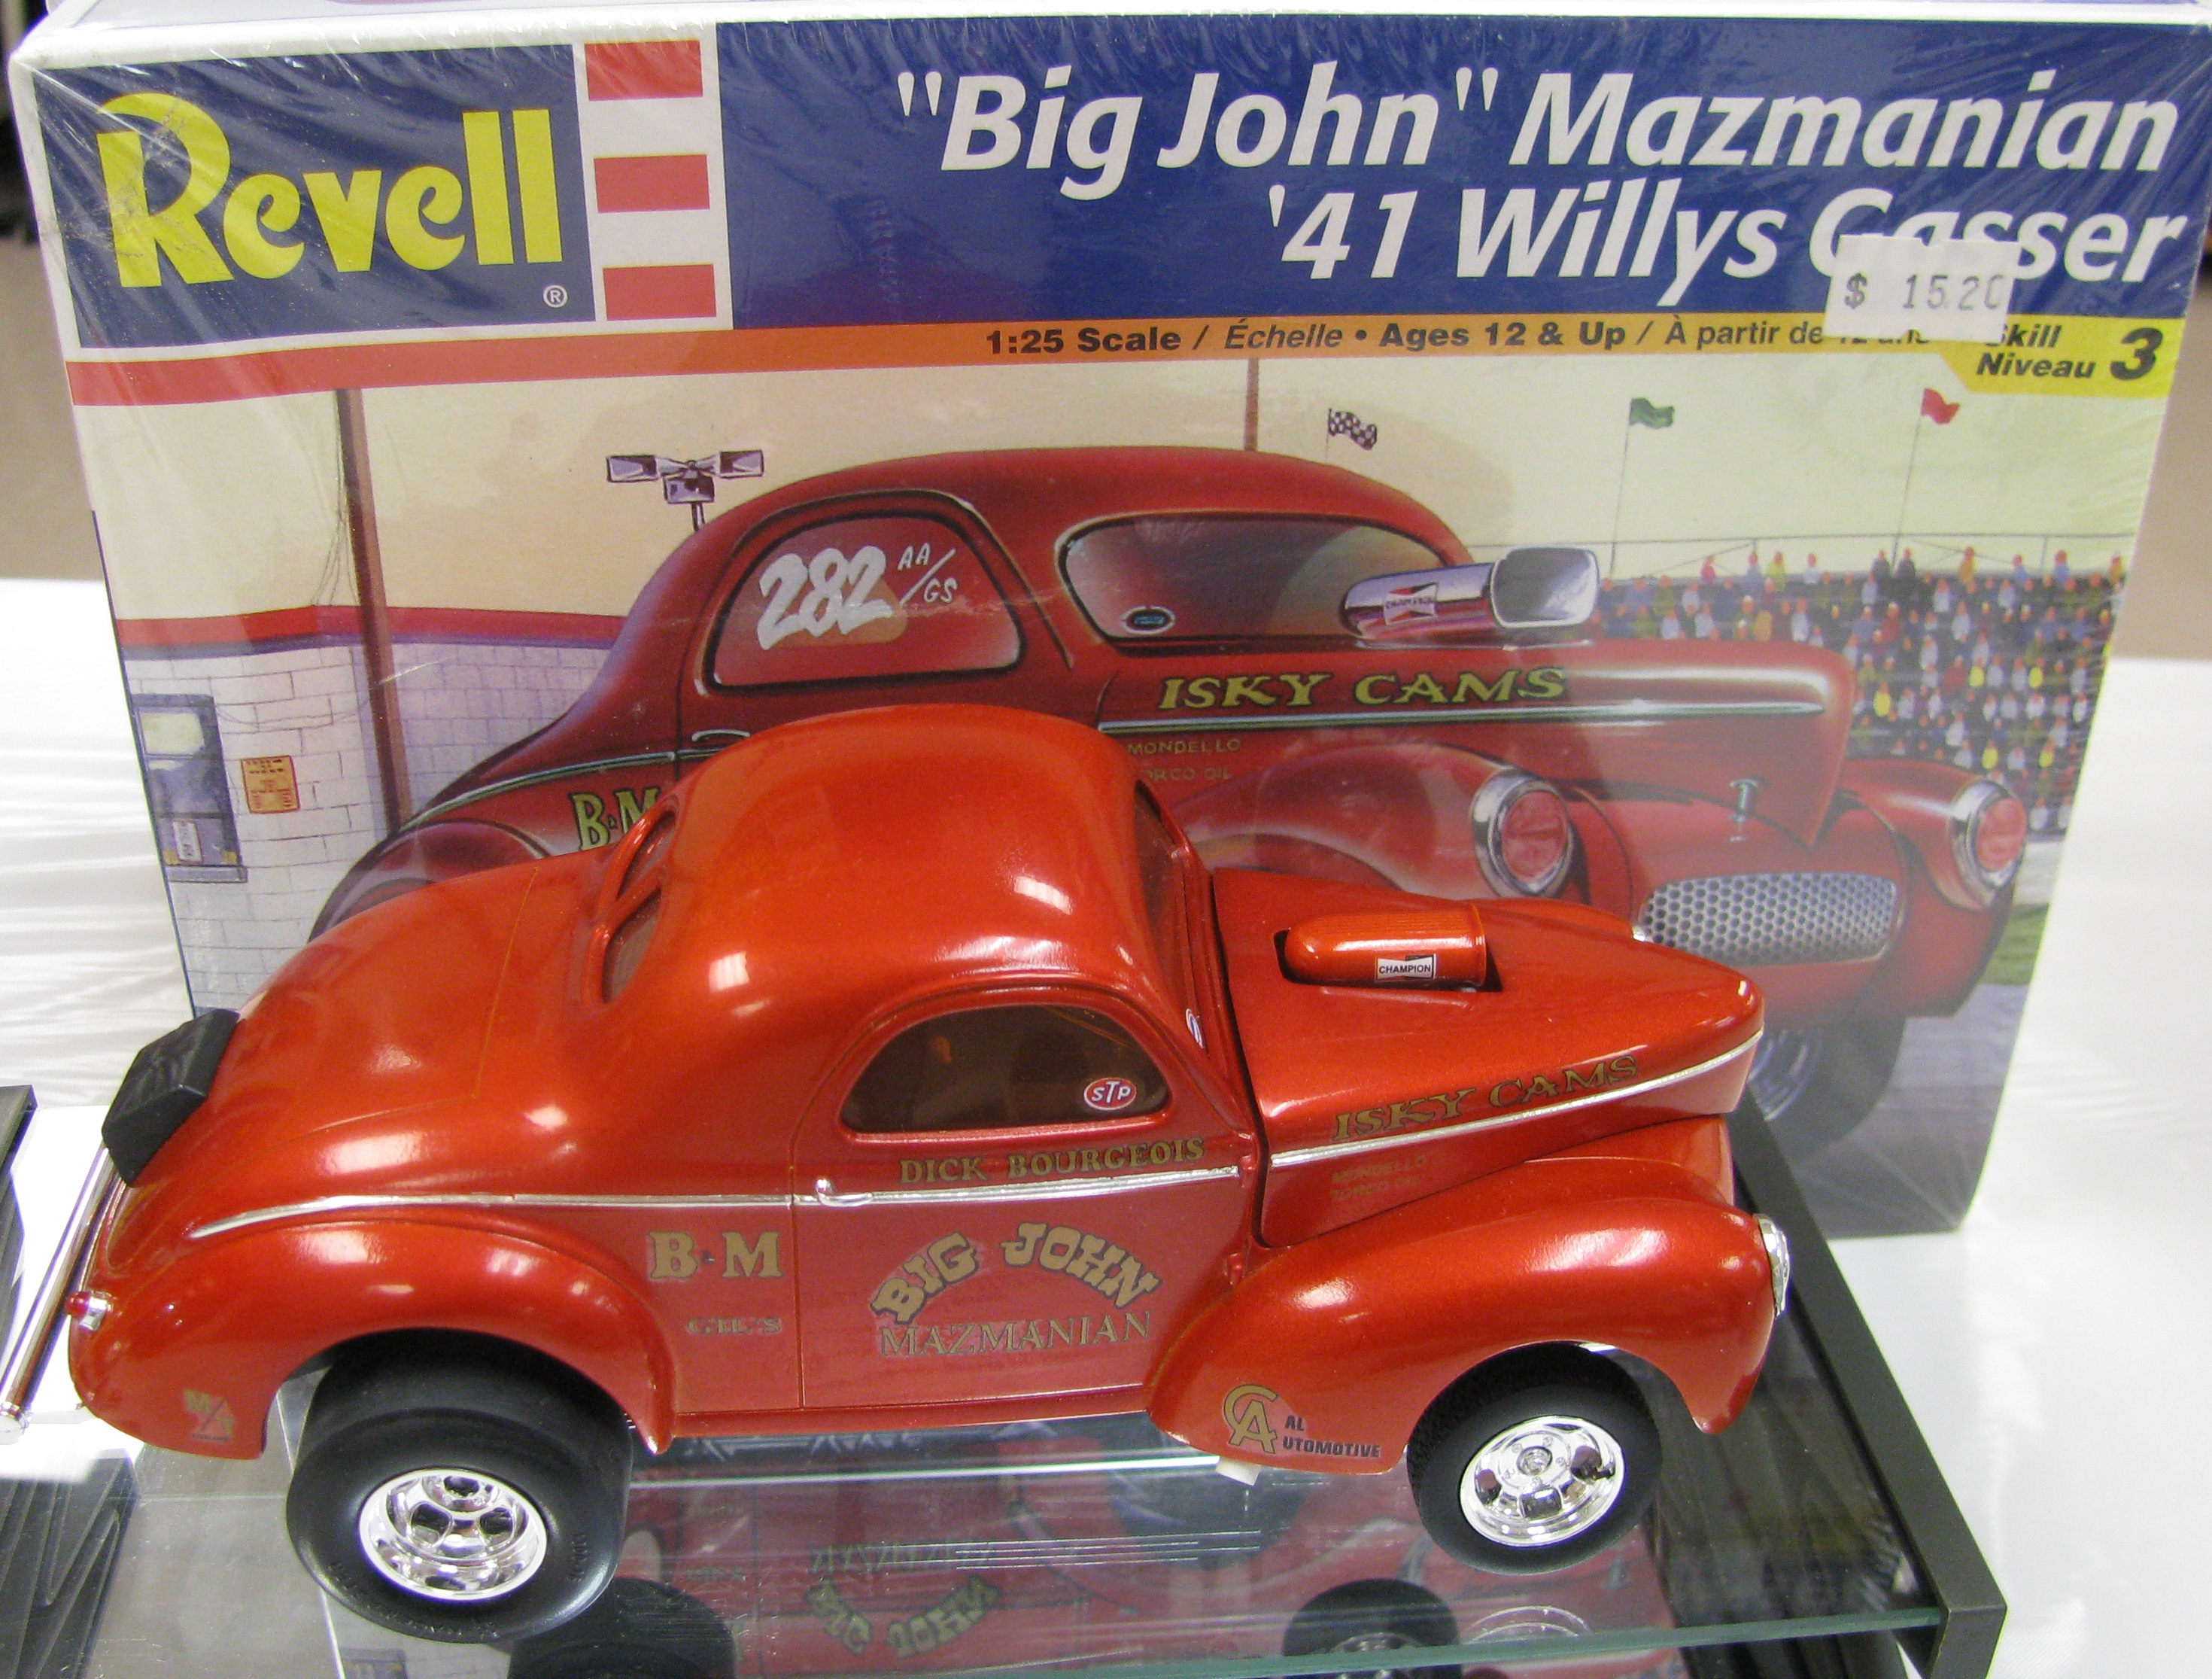 View photo of 1941 Willys